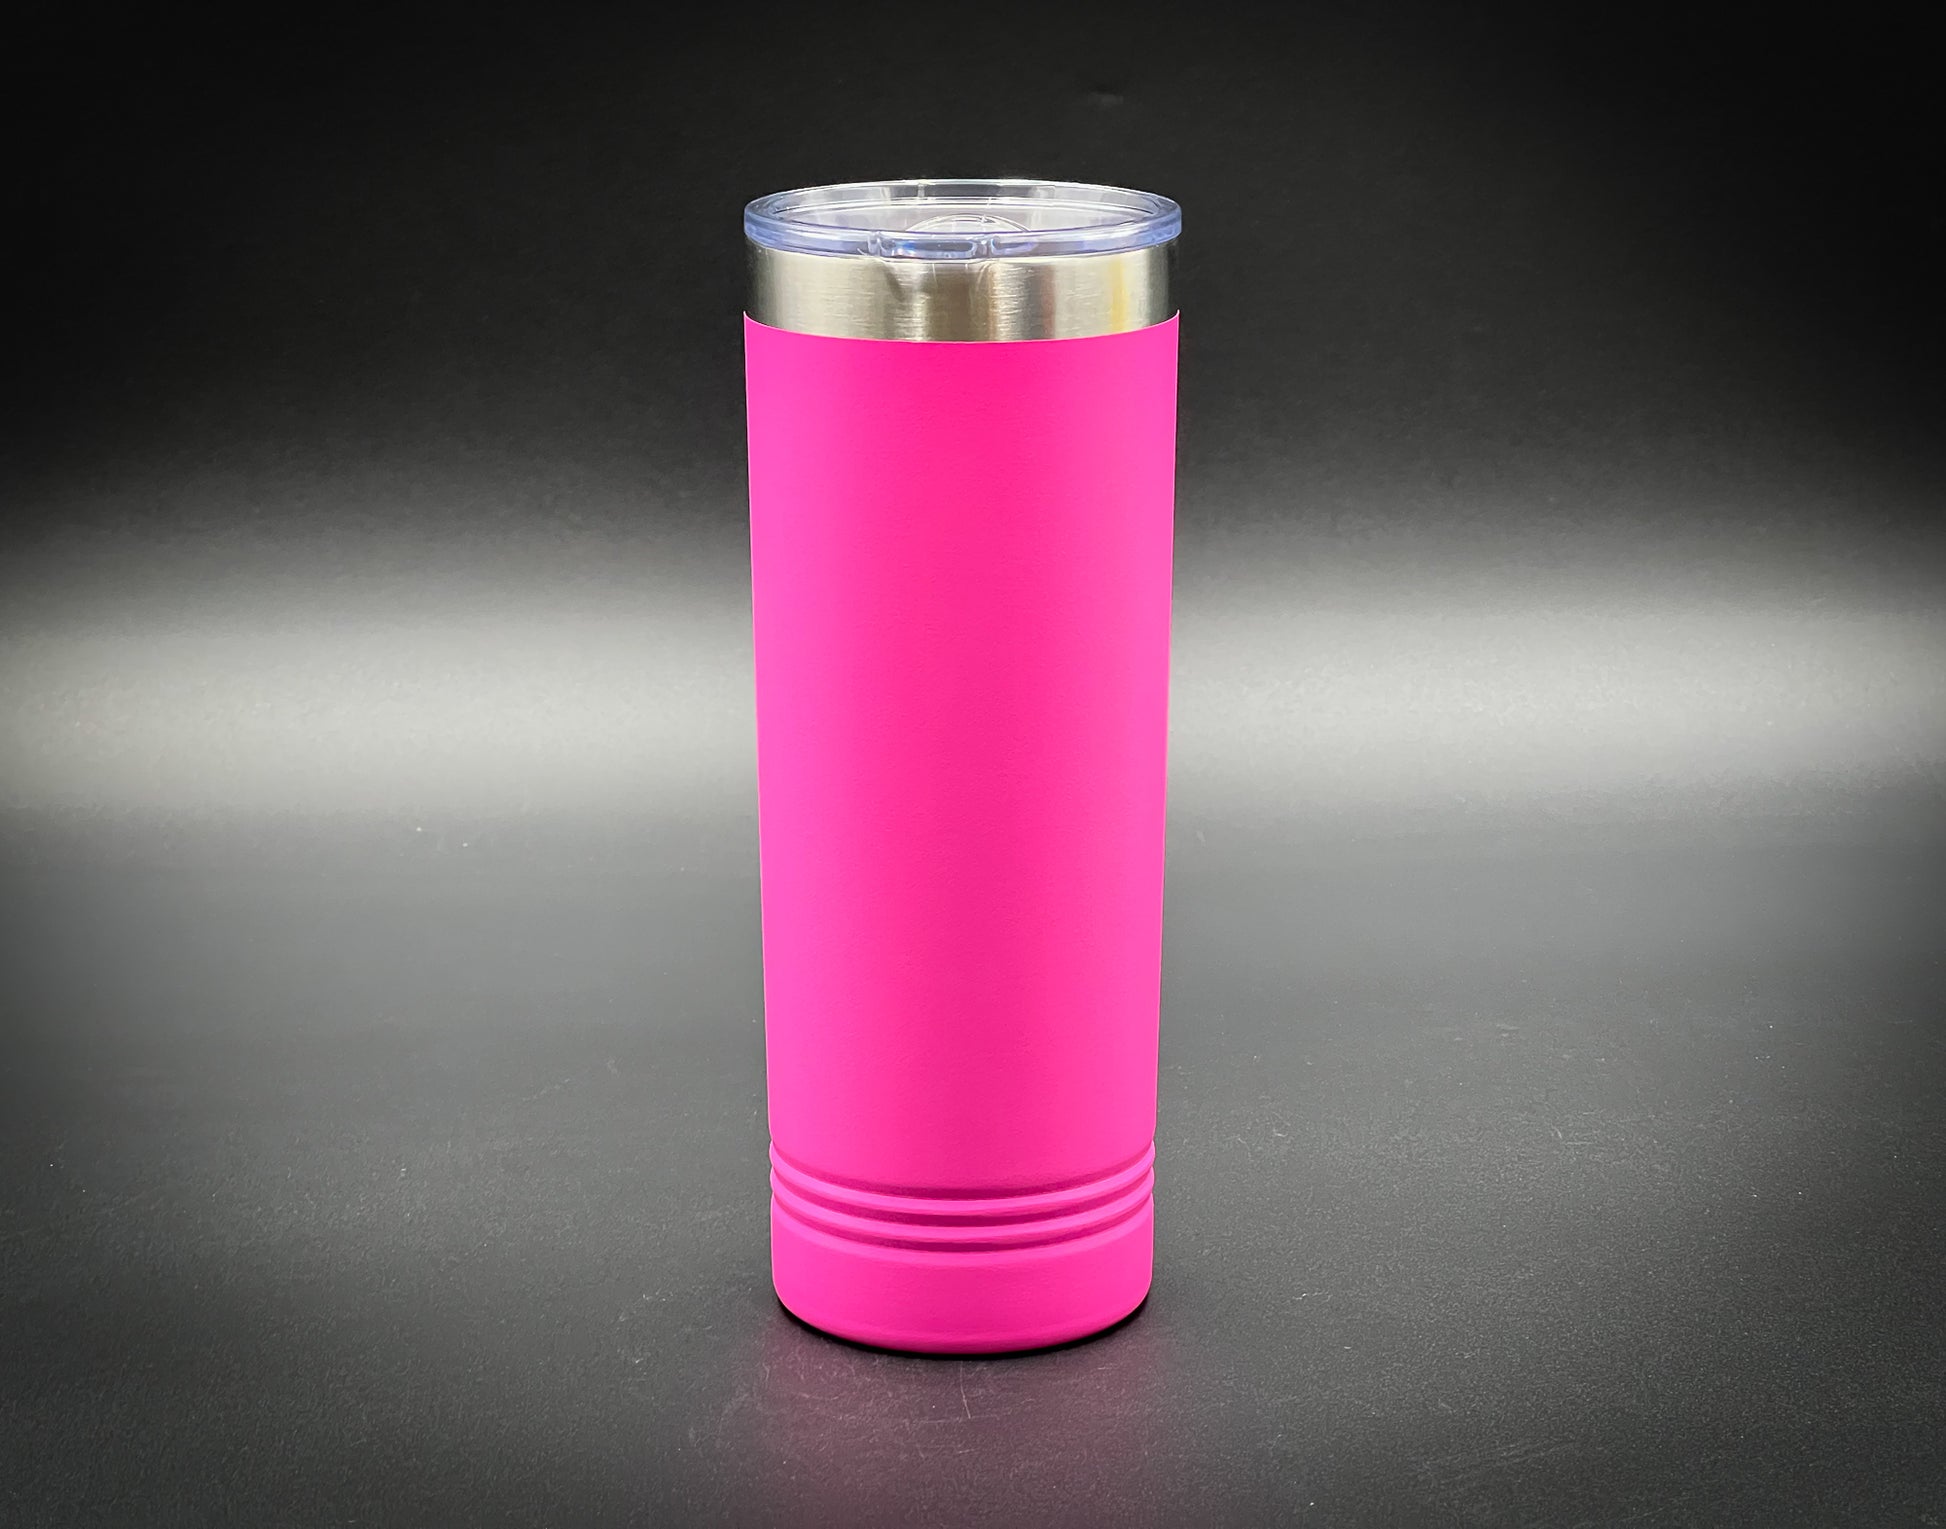 Classy With A Savage Side-hot Cold Tumbler-sassy Hot Cold Tumbler